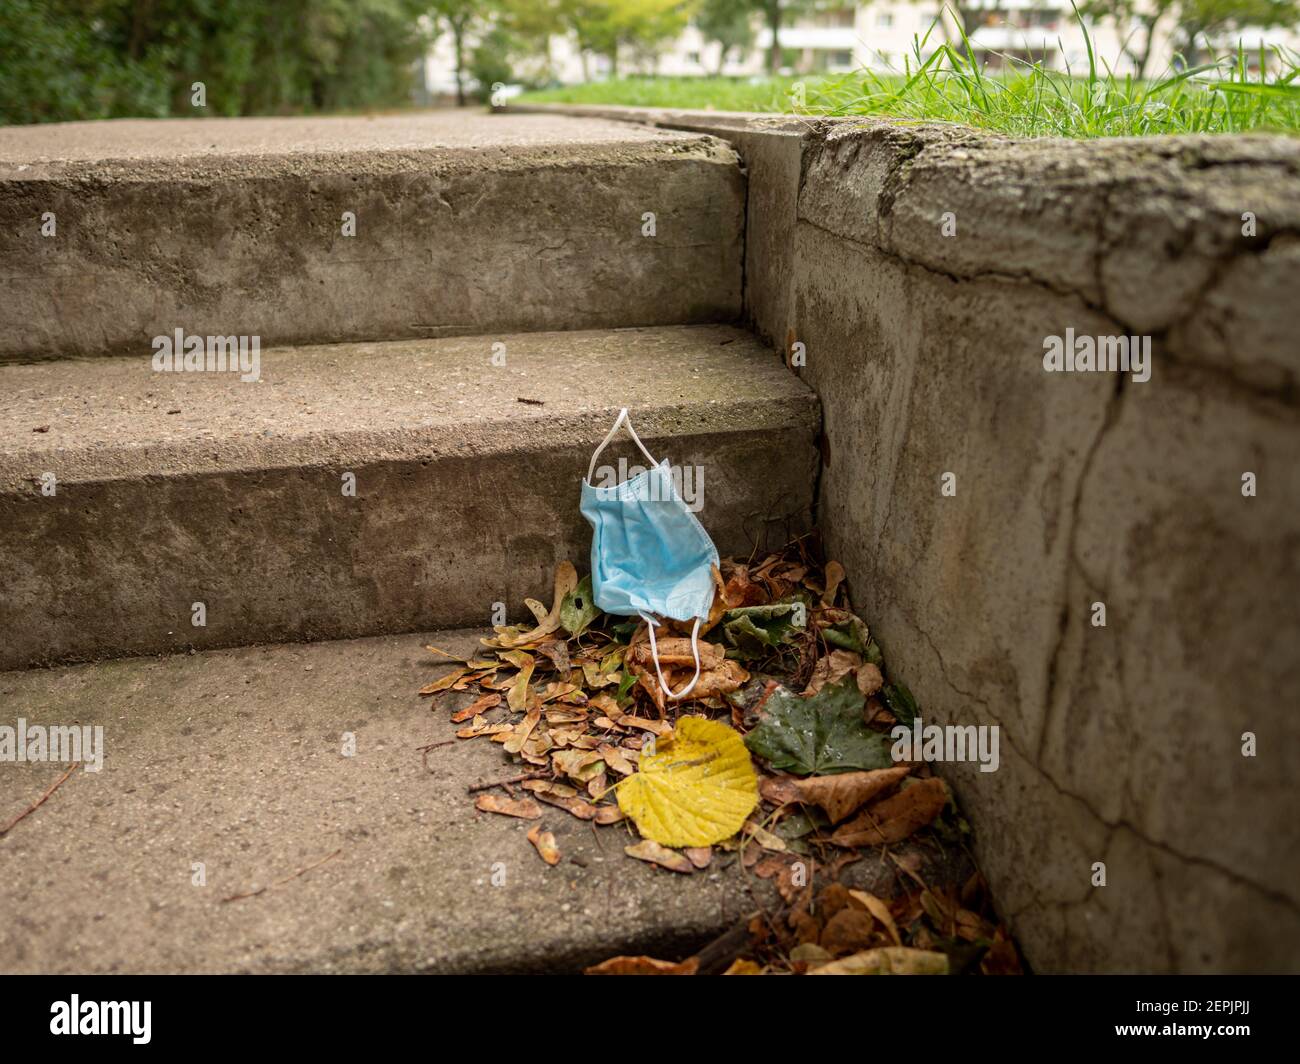 Used face mask next to a sidewalk in an urban area as environmental pollution in a public park plastic waste junk Stock Photo